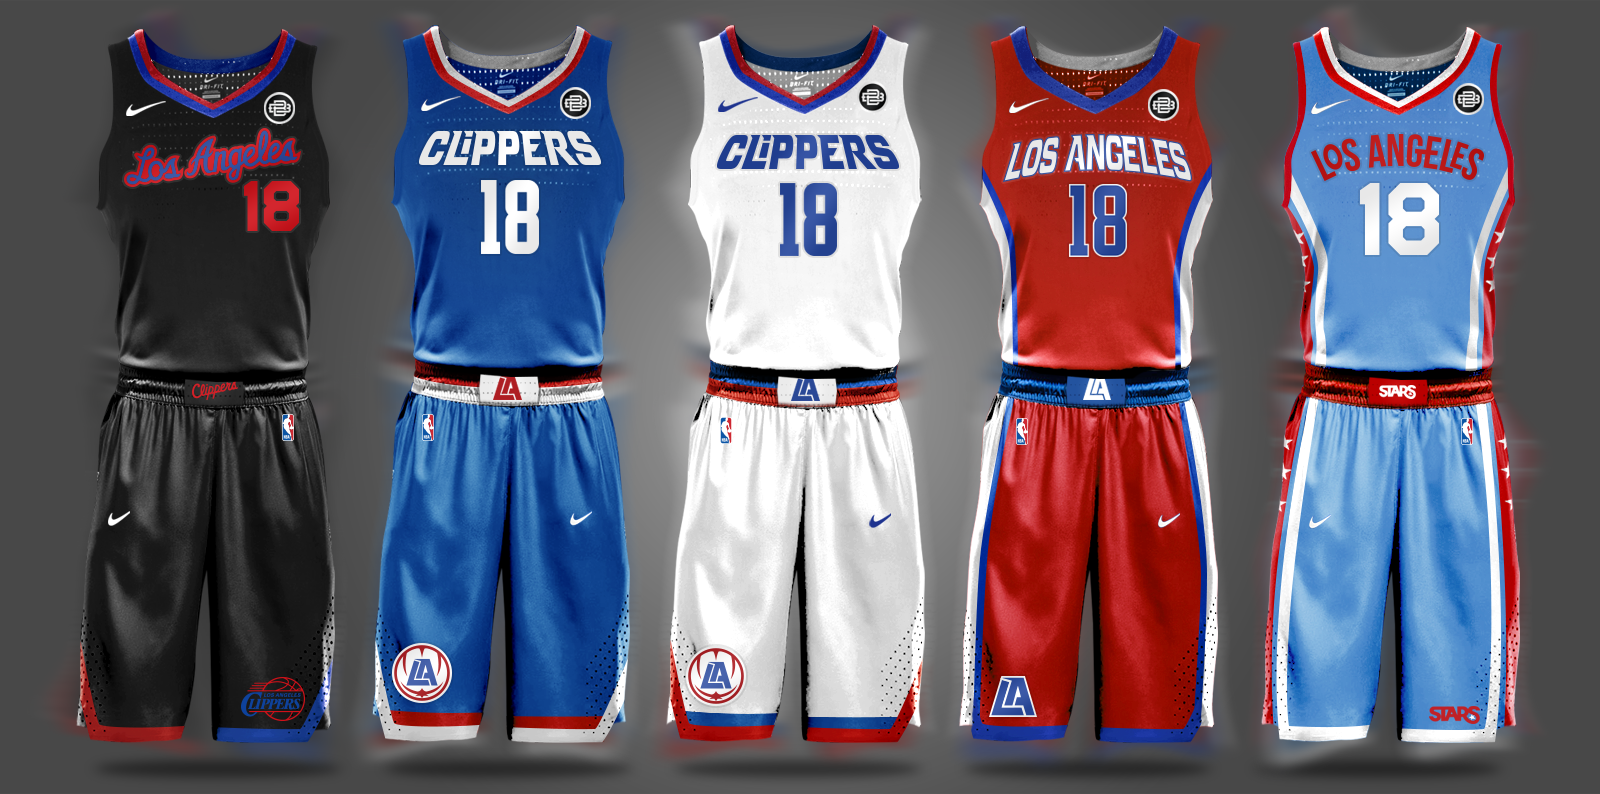 nba clippers jersey 2019